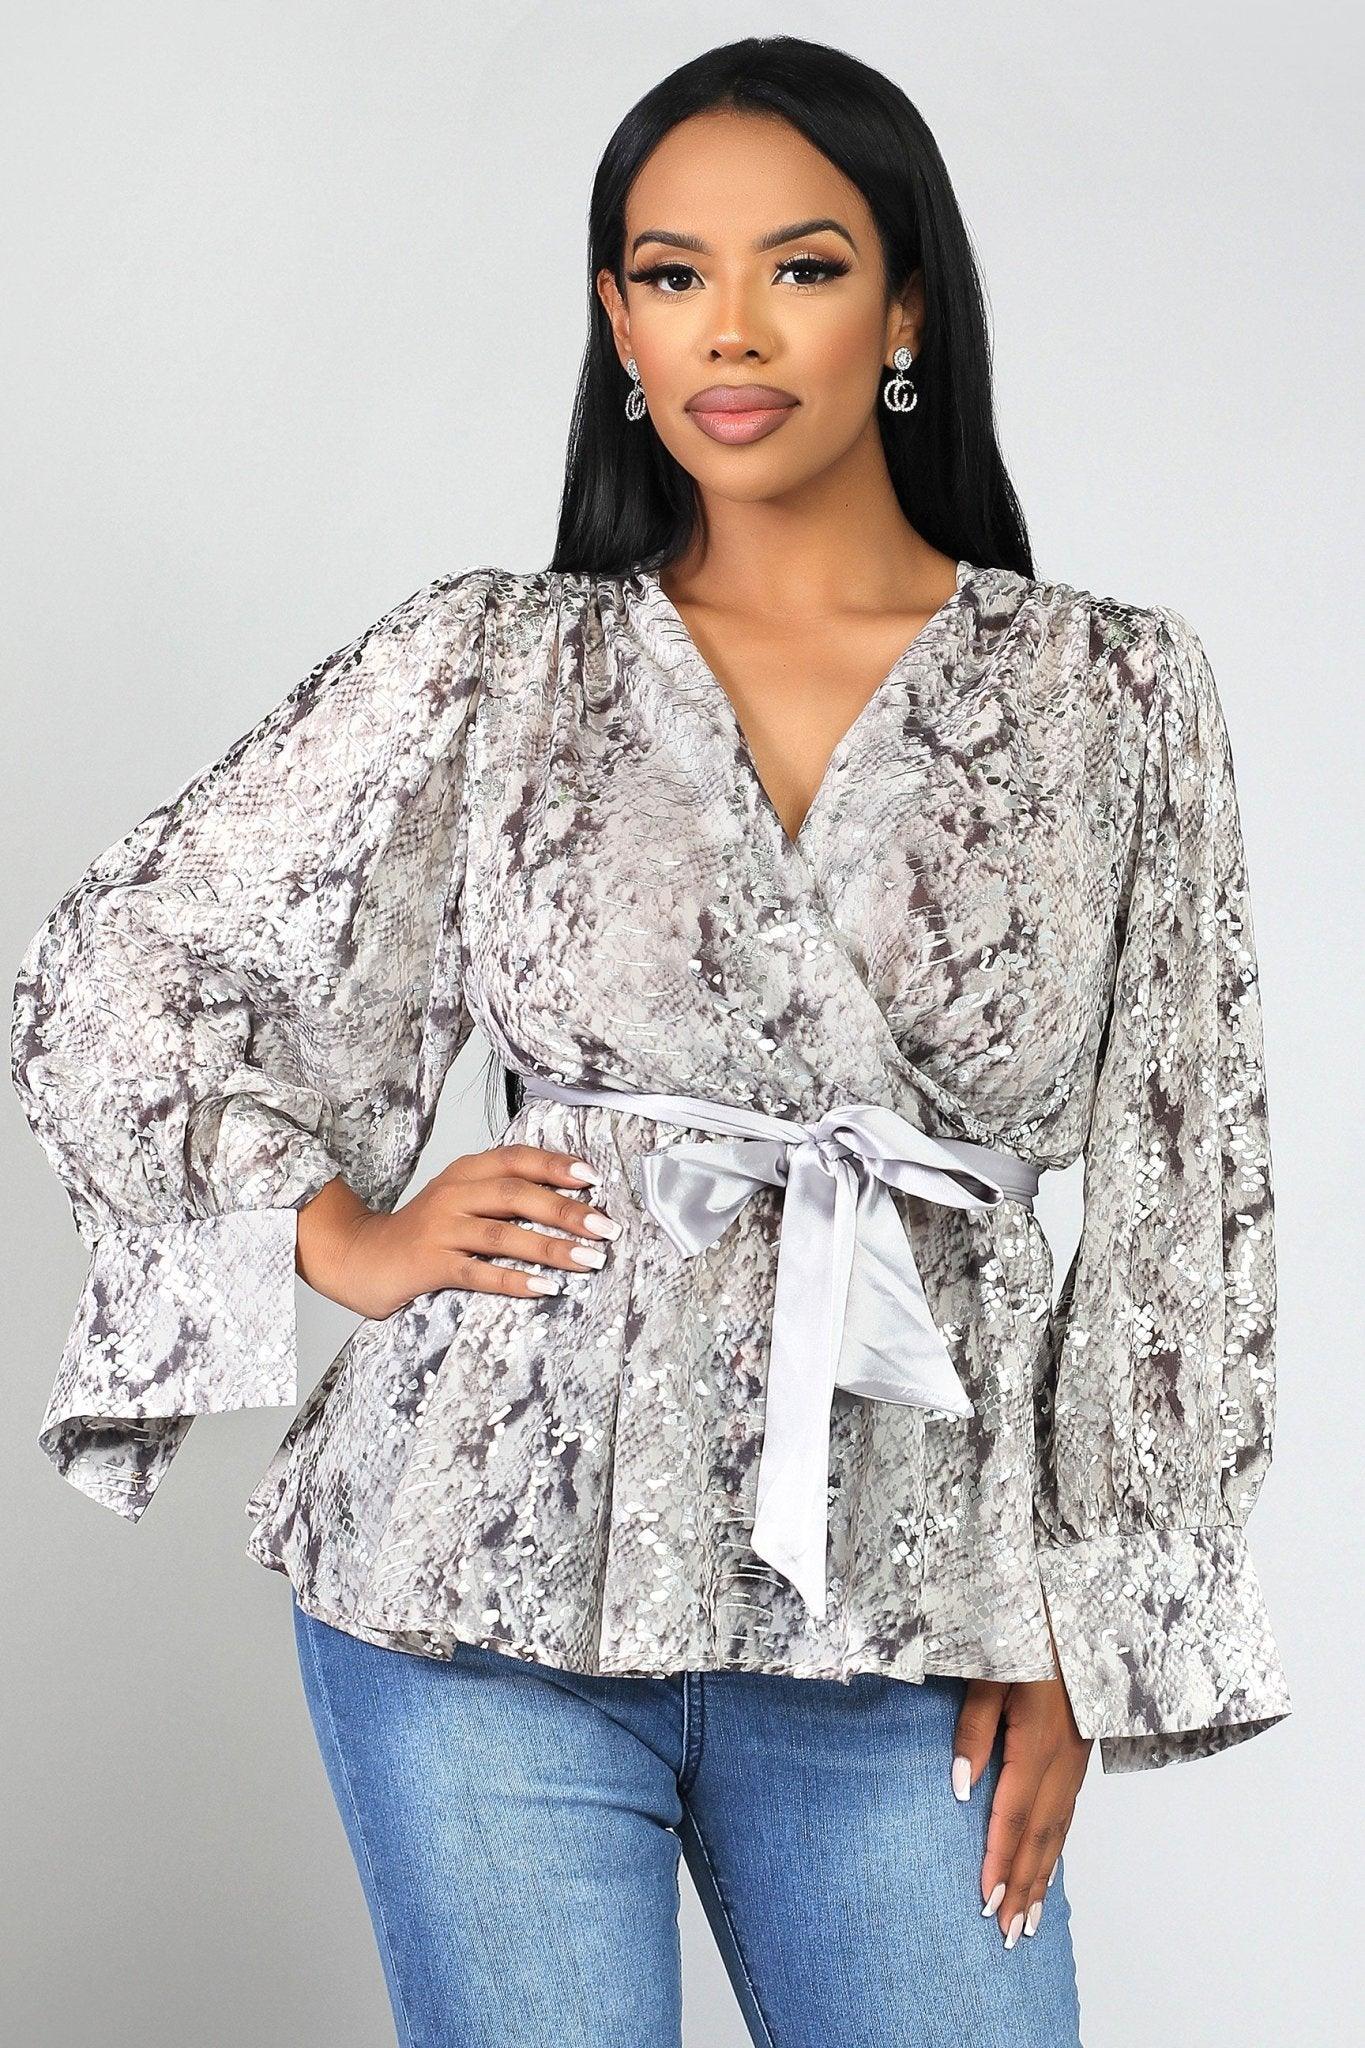 Alora Long Sleeves Blouse - MY SEXY STYLES